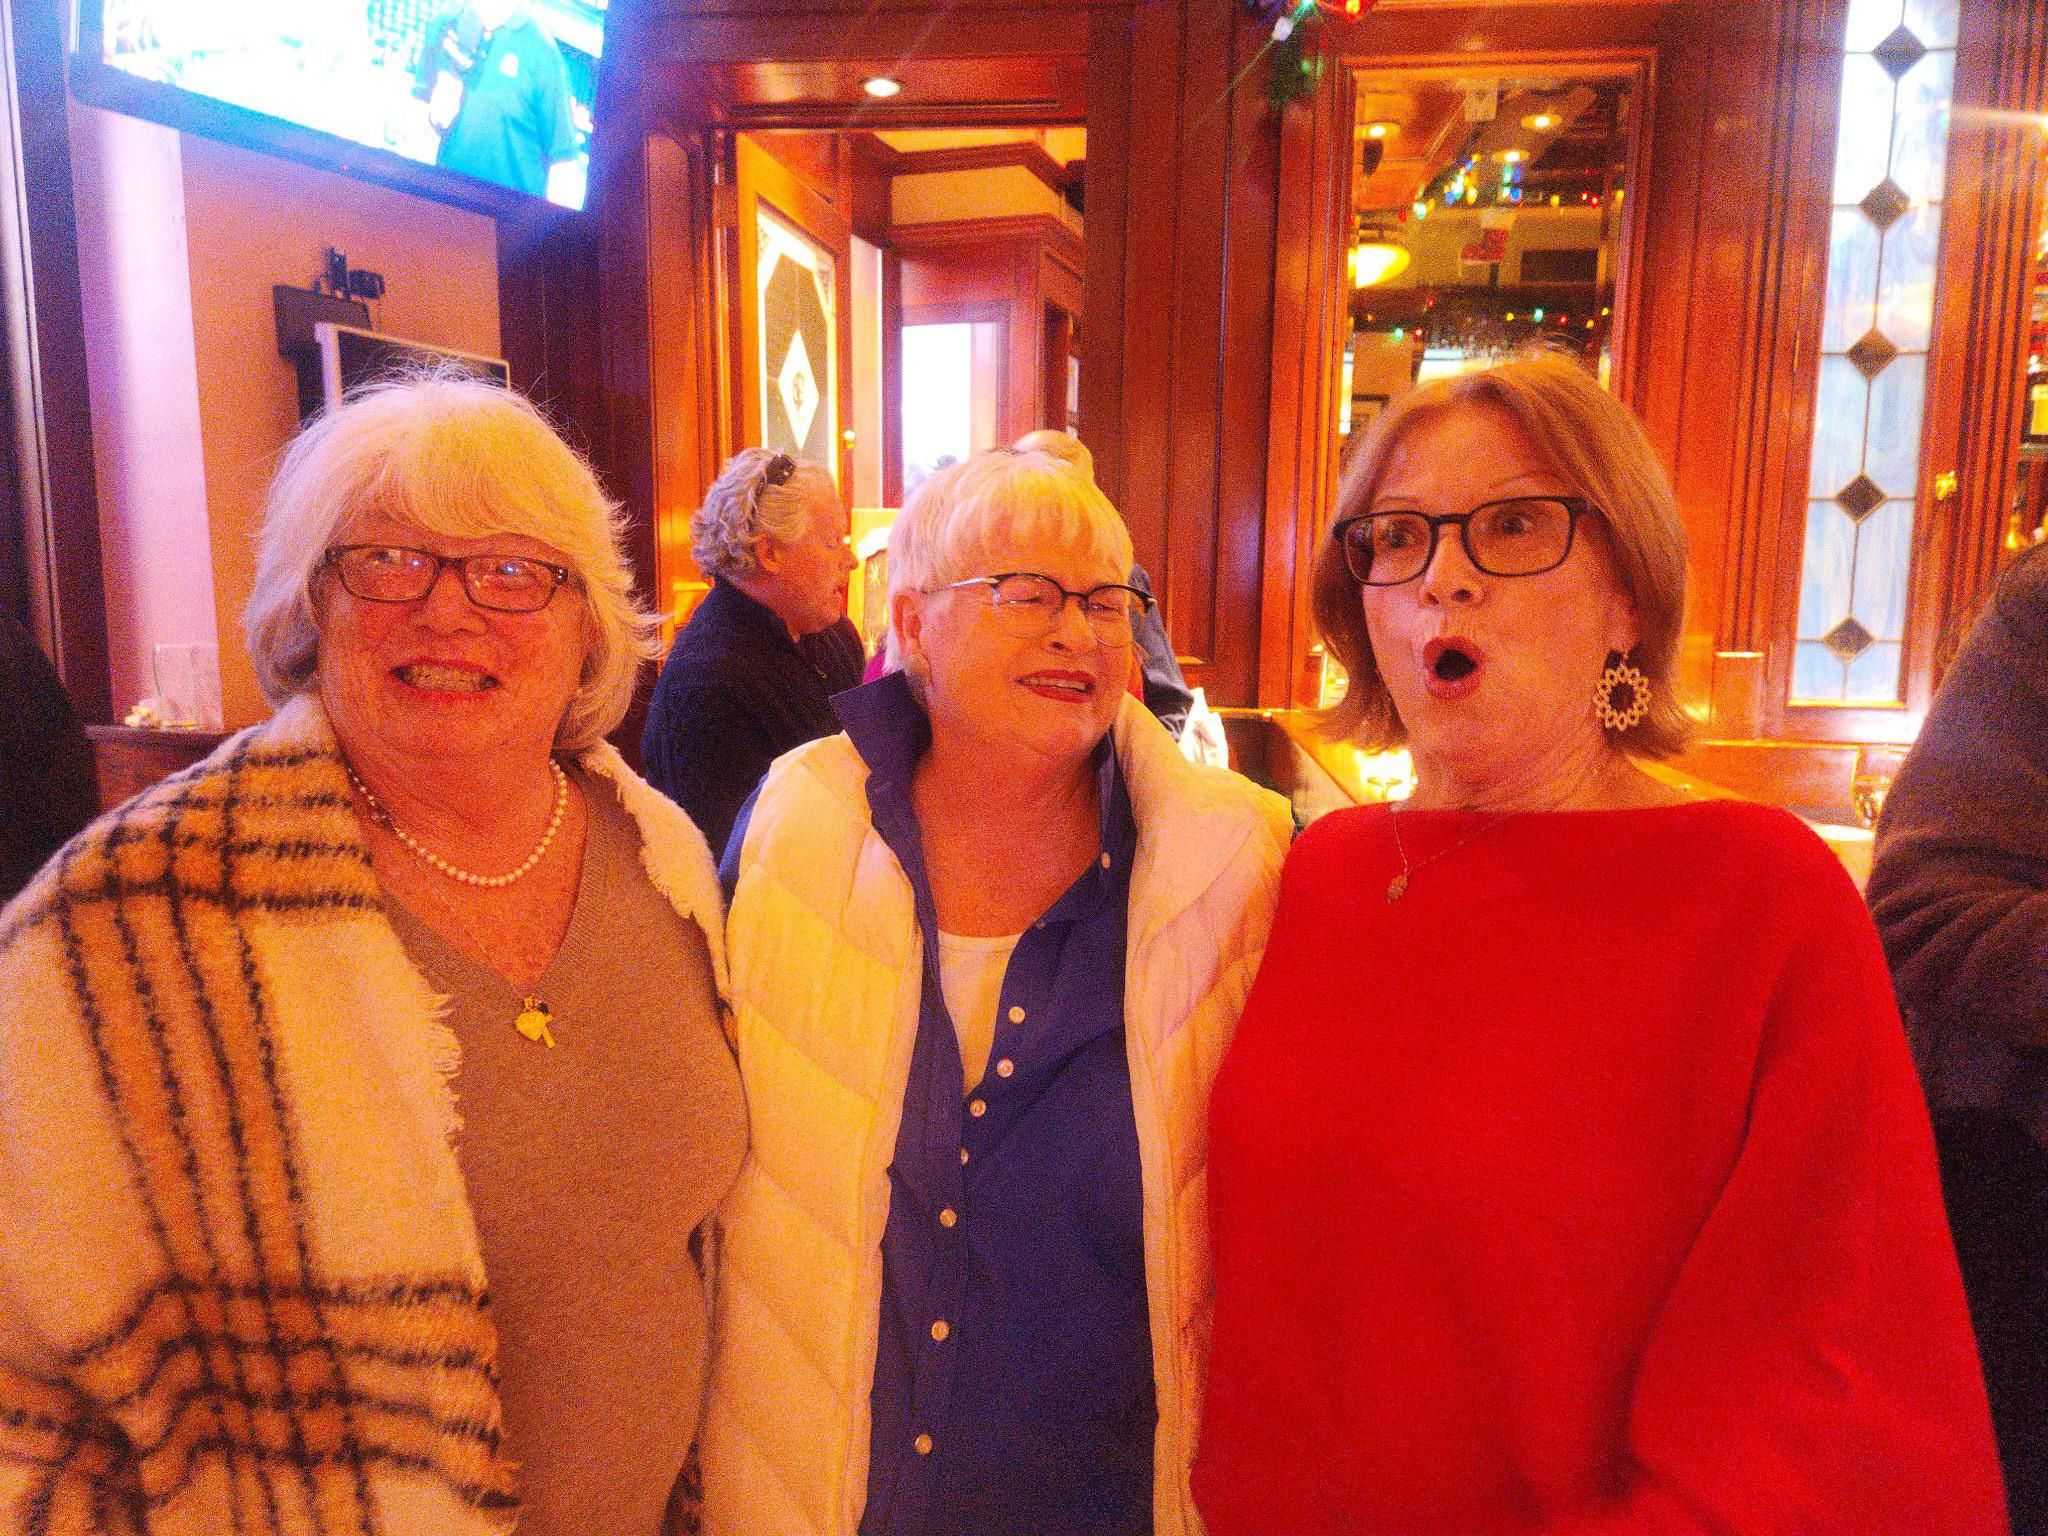 Yelled “VAGINA!!” at my mom and aunts during a holiday party picture.